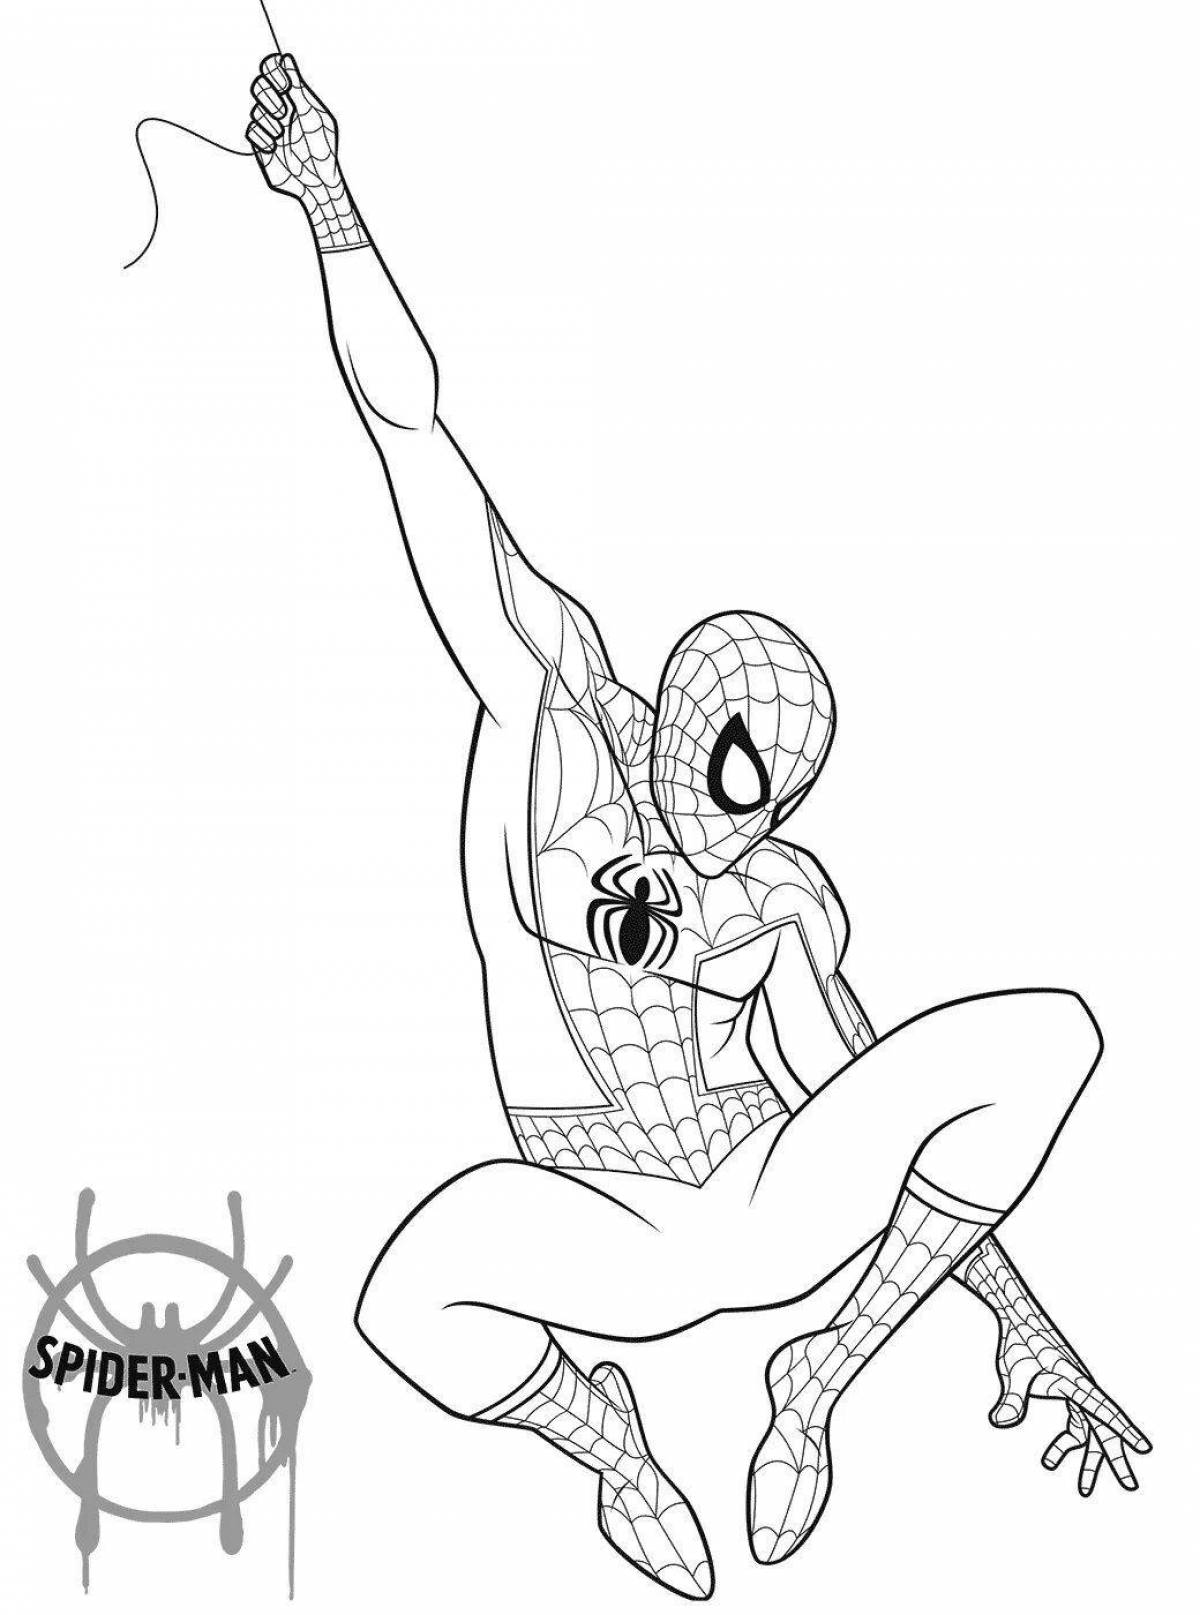 Spiderman's obscene ghost coloring page